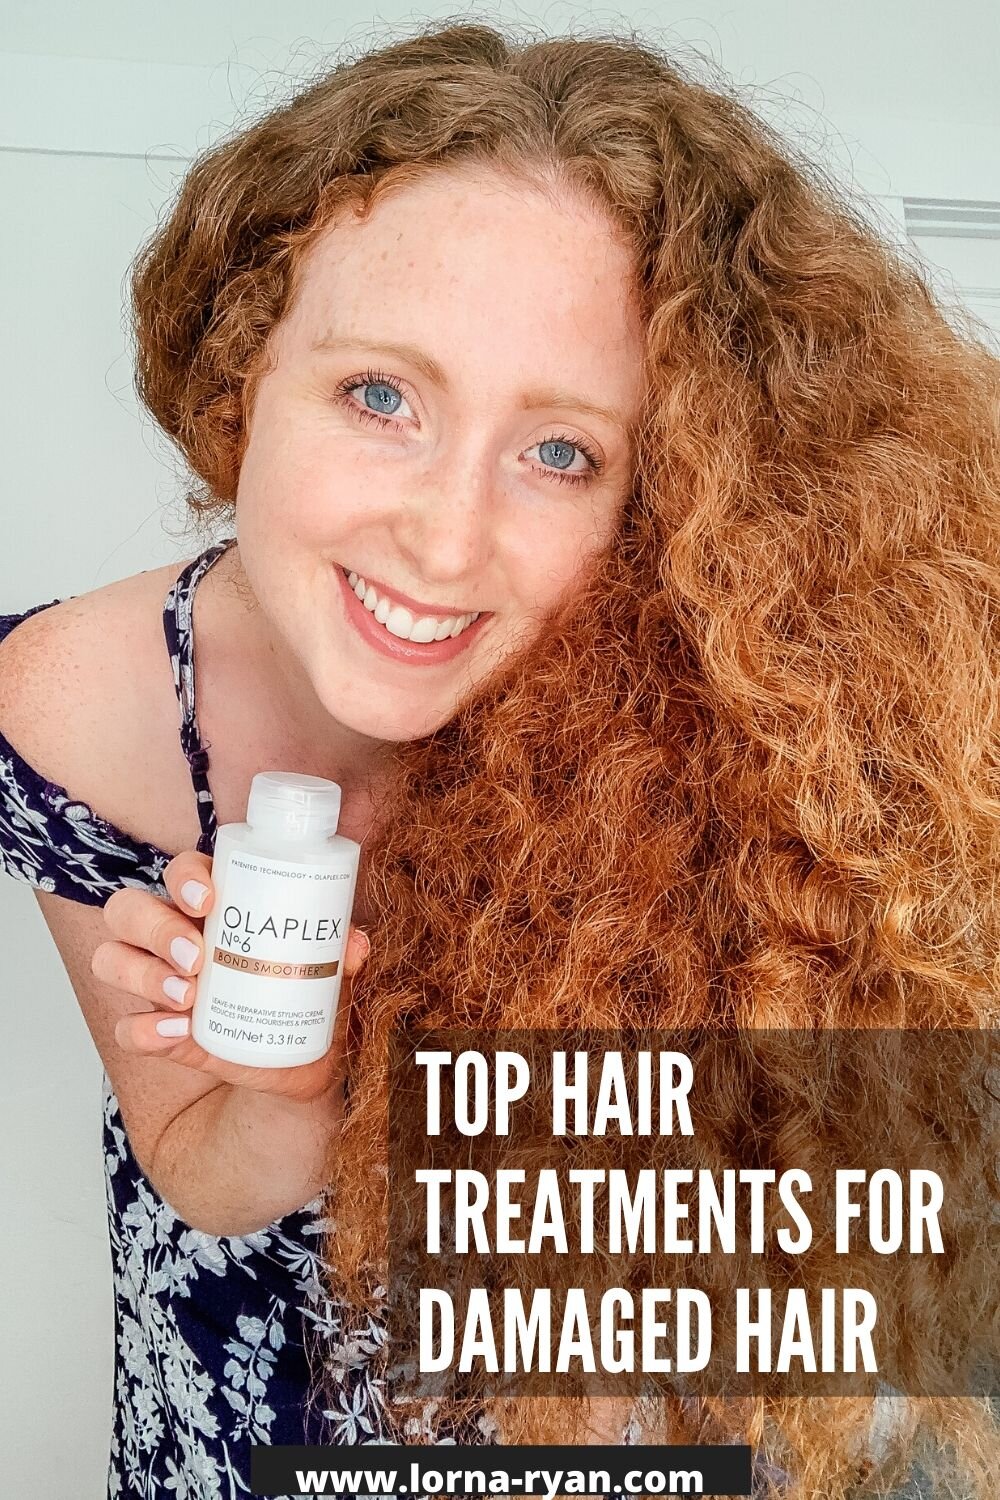 Find out the top hair treatments available at Sephora for dry and damaged hair. These are at-home hair treatments that are fast and easy to use on a weekly basis. Some are just 1 minute! Your hair will be healthy, shiny and repaired after using thes…